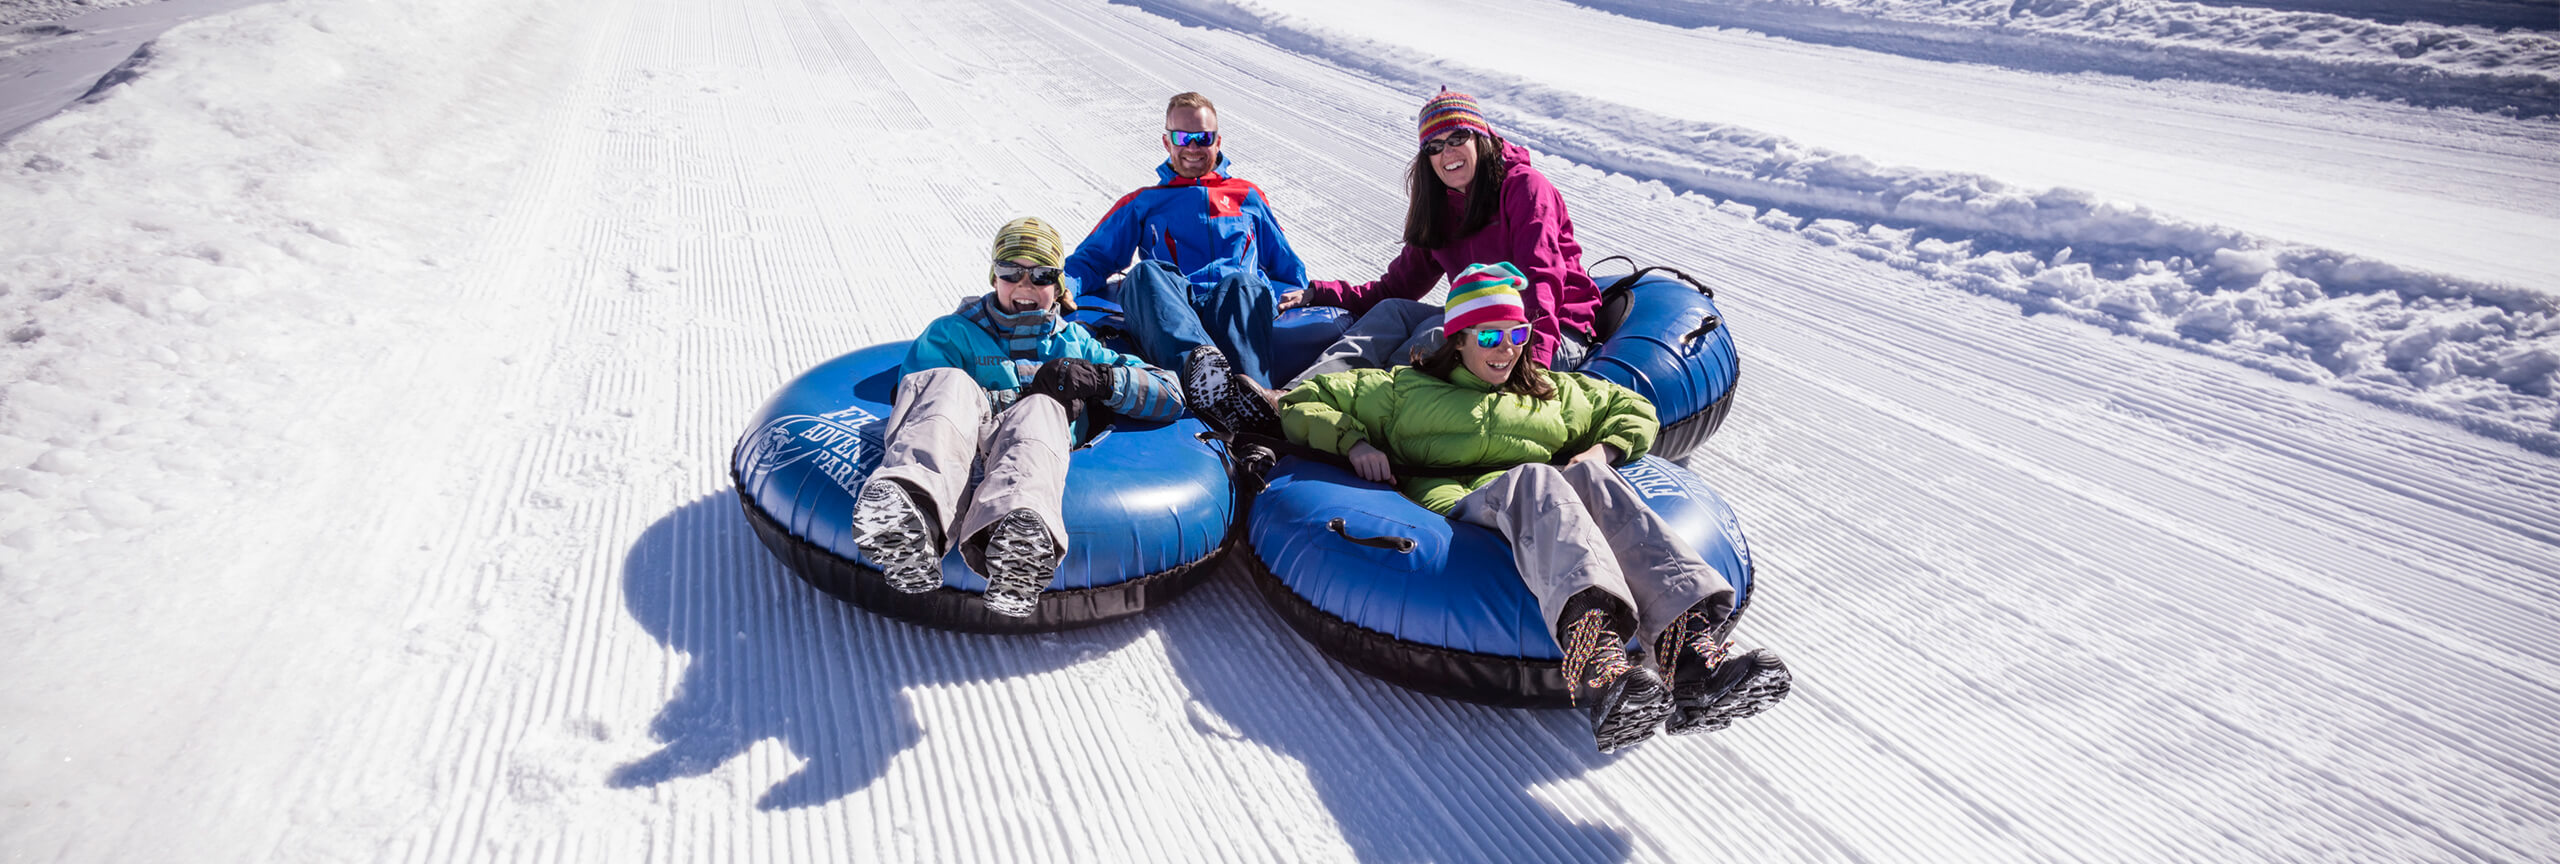 Family of four tubing down hill at Frisco Adventure Park